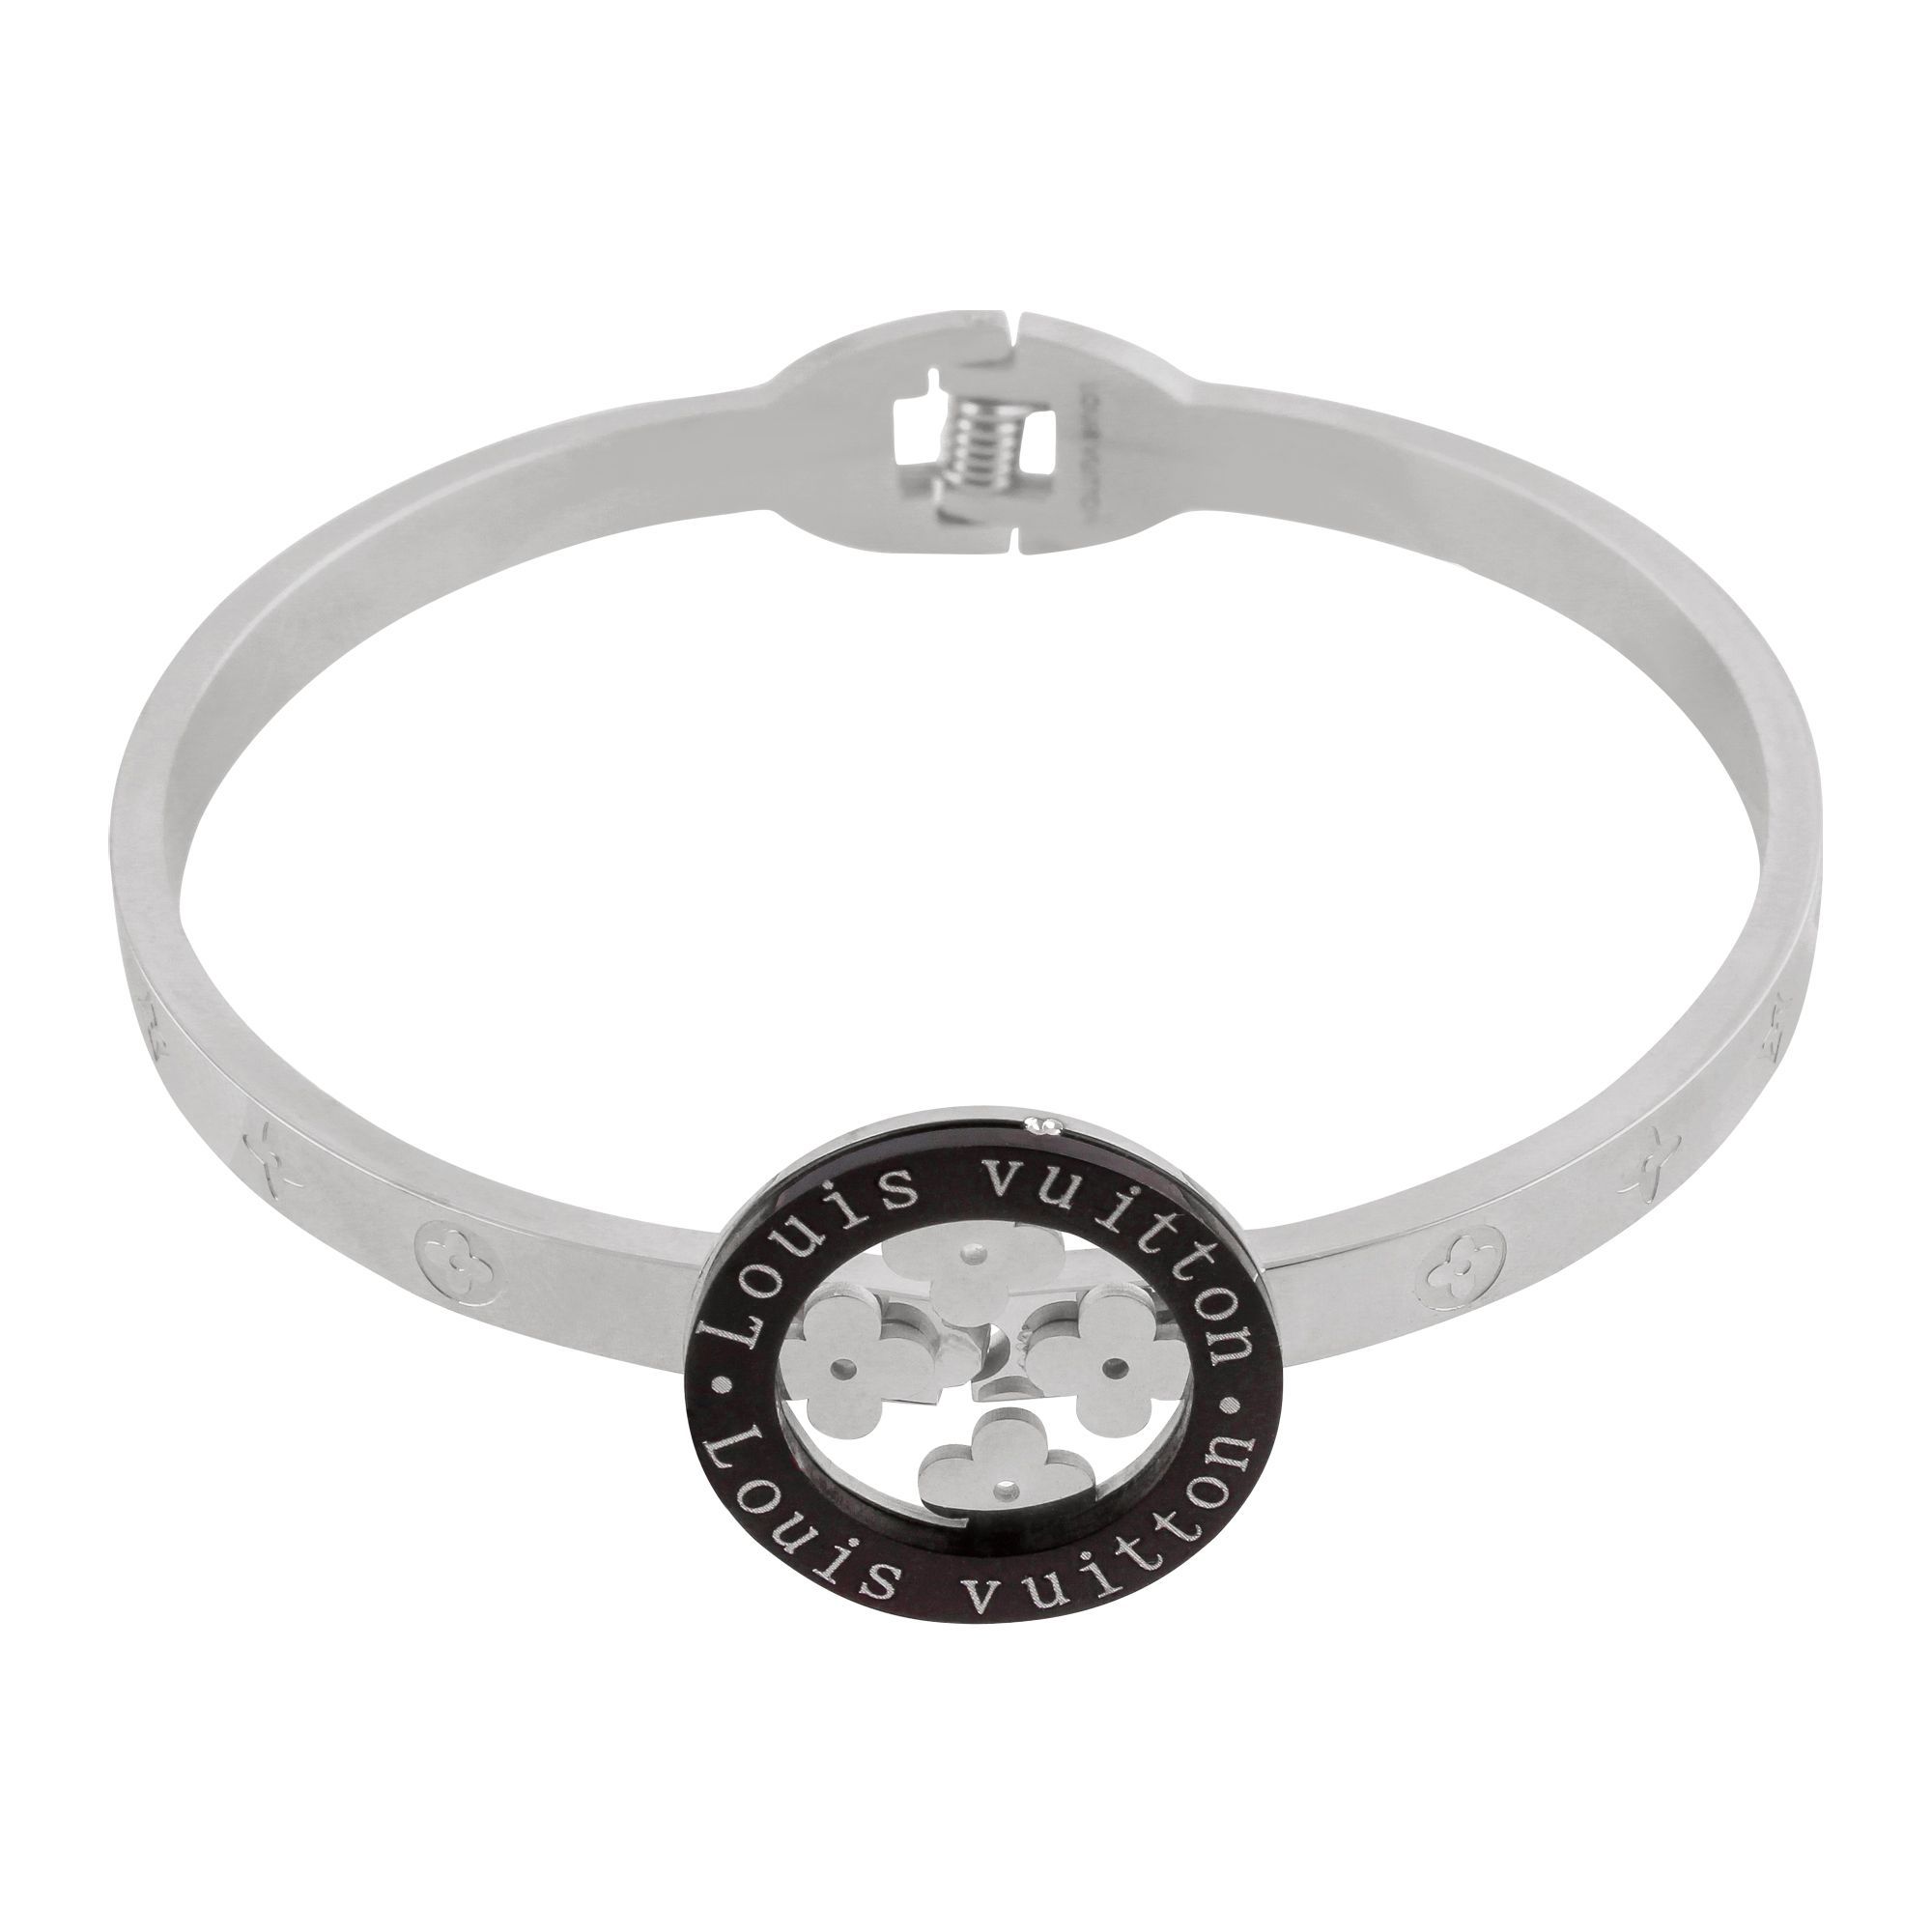 Purchase LV Style Girls Bracelet, Silver, NS-0165 Online at Best Price in Pakistan - www.semashow.com